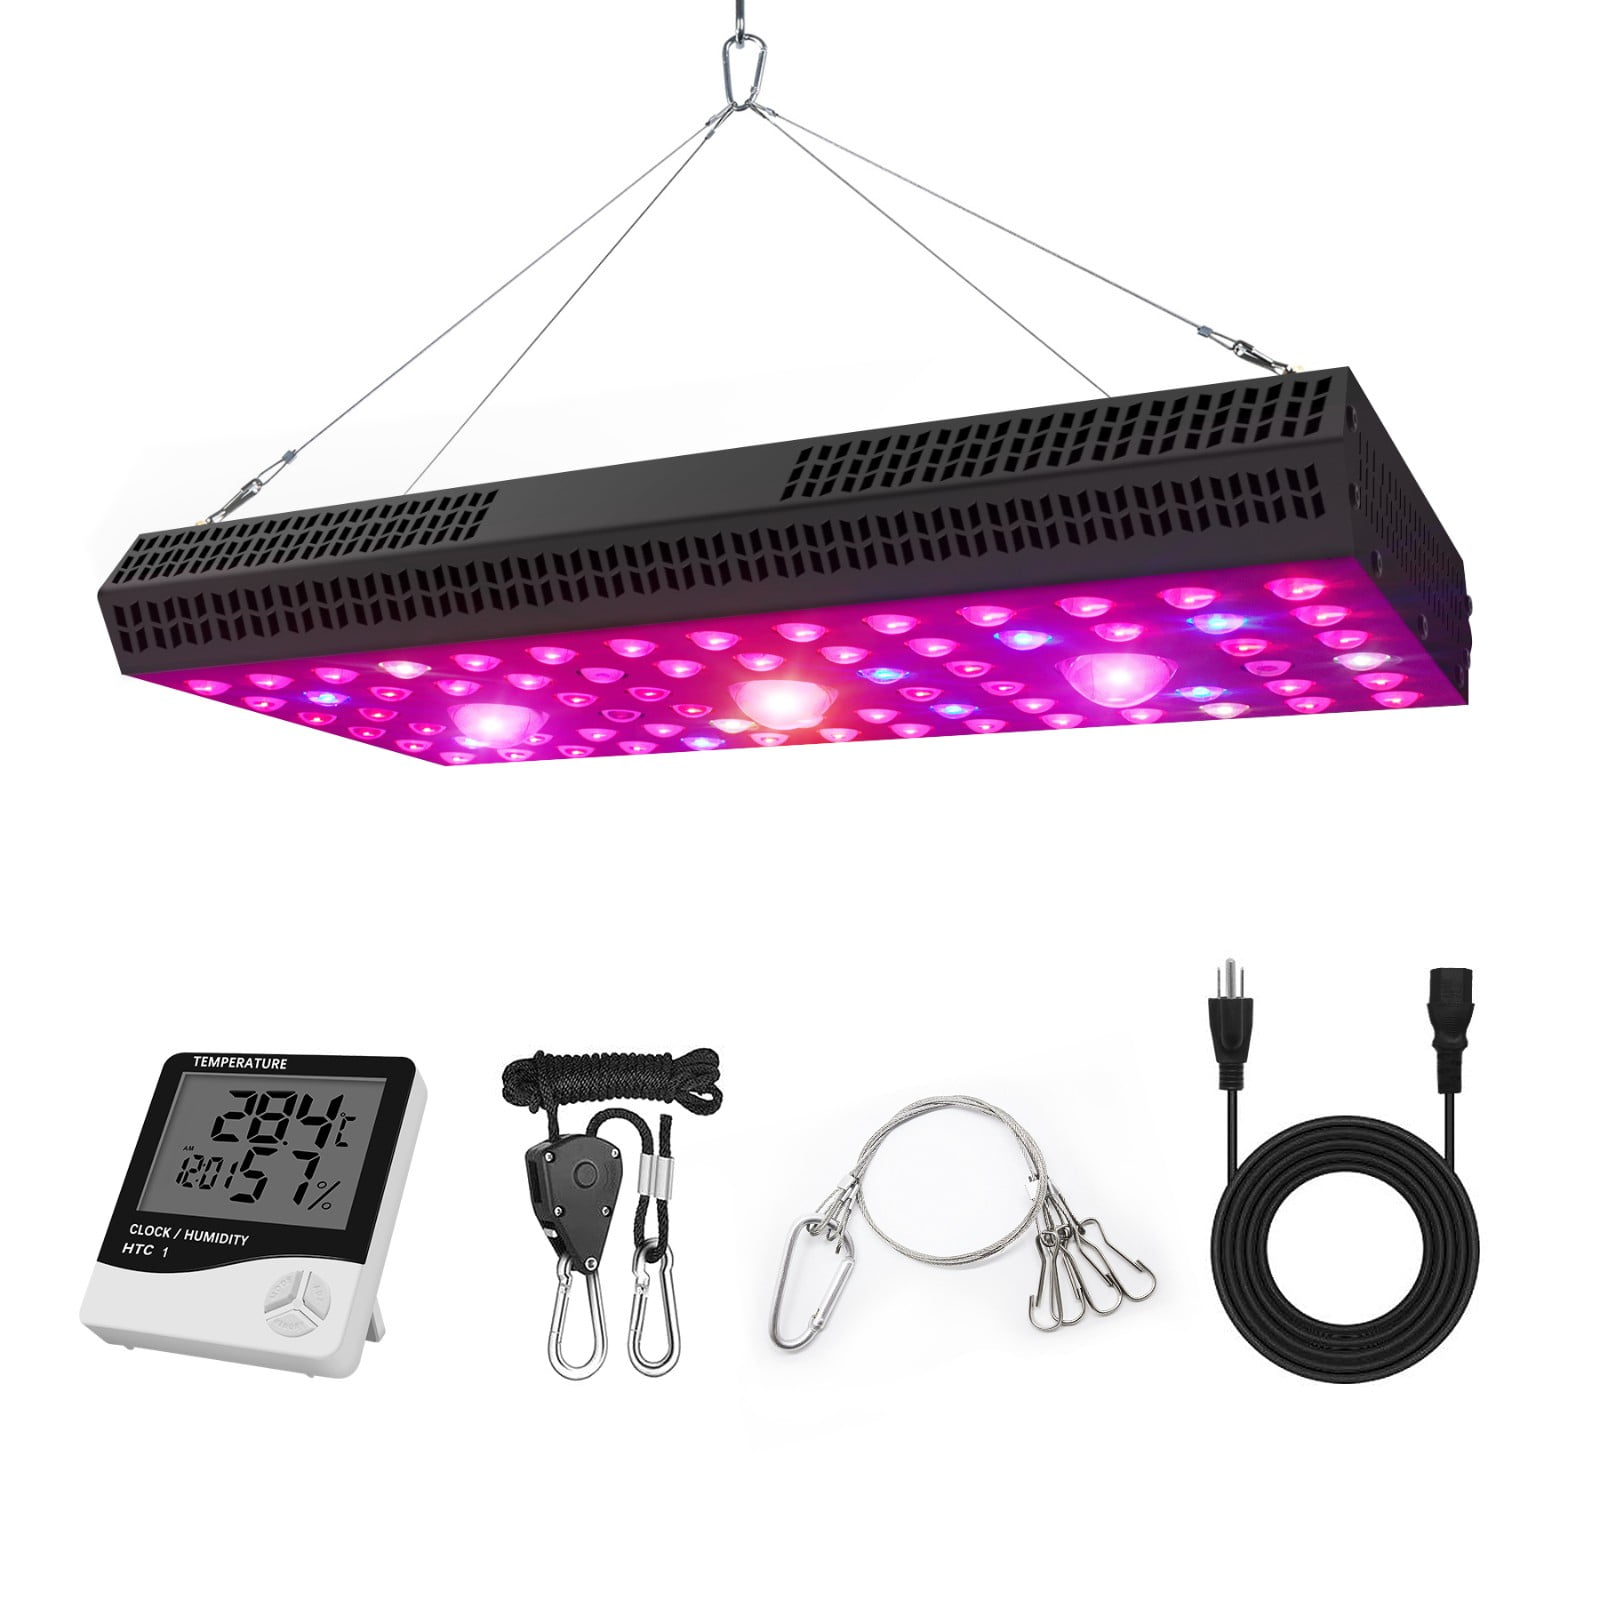 Phlizon 1500W Dimmable Plant LED Grow Light Lamp Full Spectrum for Indoor Plants 